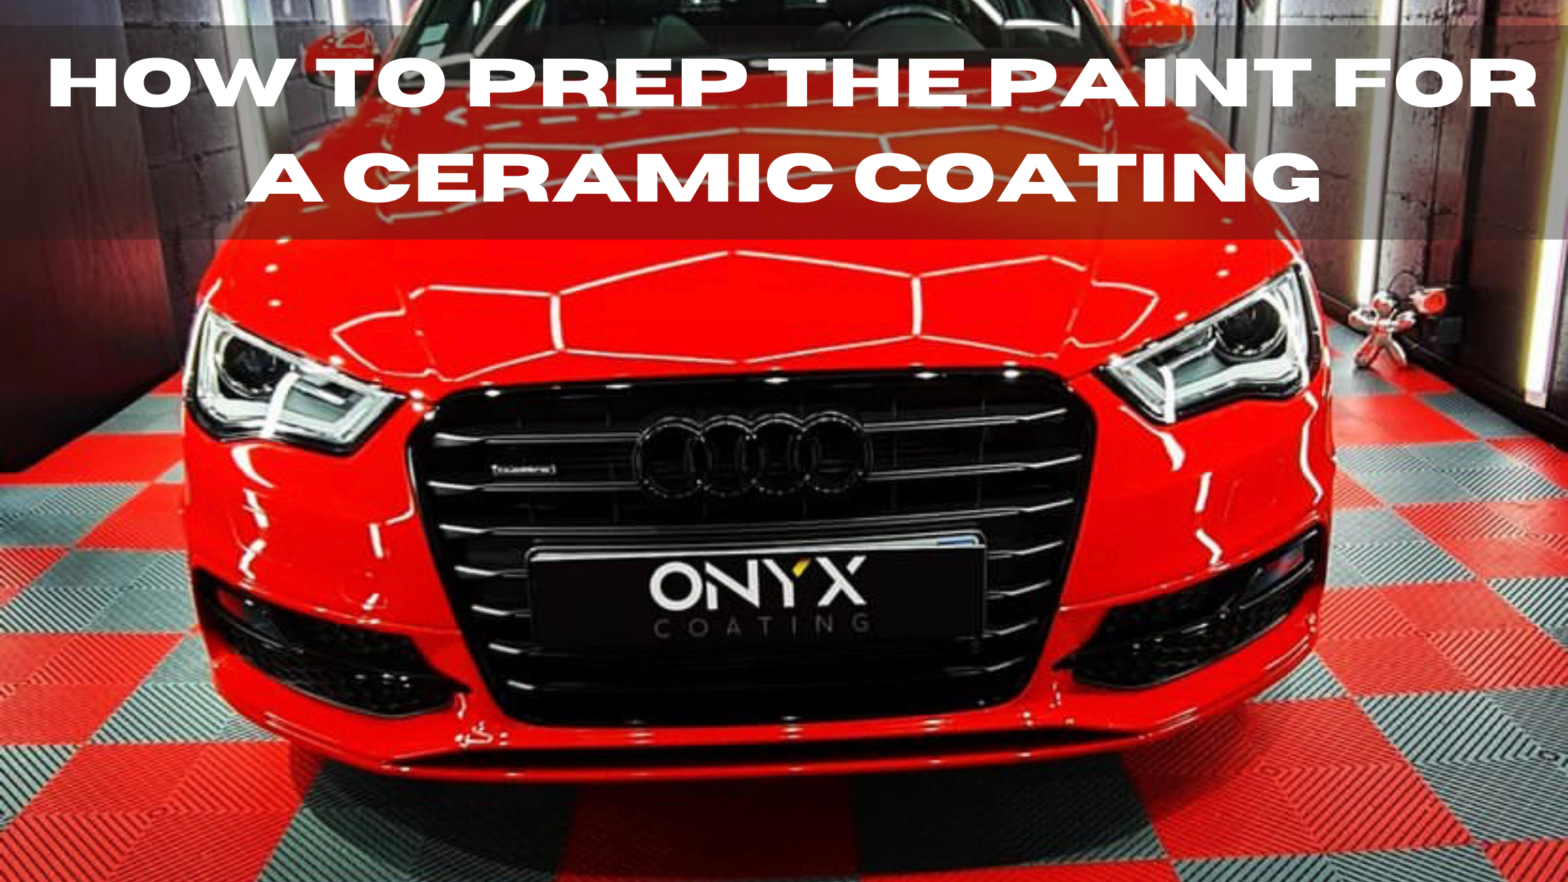 Preparing a car's paintwork for a ceramic coating couldn’t be any easier than following these three steps: wash, polish, and lastly apply a paint prep spray. So let’s get down into the details. WASH To get any ceramic coating looking its absolute best start with making sure that the surface is 100% clean and ready to work with. This means giving the exterior a deep clean. Here is our 4-step process for cleaning the exterior effectively: 1. Fill one bucket with water and soap and the other will be plain water. Place a Microfiber mitt into the bucket with soap and water. 2. Start washing from top to bottom, beginning with the hood. Most of the particles and debris will be on the bottom of the car, this is one of the motivations for using the top to bottom technique. Begin with washing one side of the car, front to back, then later move onto the second half. Grab your microfiber mitt and do not scrub or apply too much pressure. Simply use the weight of the mitt and rub lightly on the surface. 3. Flip the mitt over and begin to wash from the windshield to the roof of the car moving to the back PRO TIP: After washing a section, rinse the mitt off to remove collected dirt and debris 4. Dry the exterior We highly suggest that when drying the exterior with a microfiber towel that you lubricate it with car wax, or Ceramic Coating spray to ensure that you do not leave any swirl marks, and also give an extra layer of protection to the surface. One way to ensure that the car is completely dry is using two towels for this process. One towel is used to soak up all the excess water and the other is used to double-check, making sure the surface is perfectly dry. Onyx Coating expert TIPS: Always start from the top and work down. Some believe that the best way to wash their car is, to begin with, the toughest and dirtiest areas, however, as professionals the Onyx Coating team recommends that it's essential to start at the top and work towards the bottom using gravity to help wash the car as well. This ensures that the contaminants are not reintroduced into surfaces that are already clean. Also, avoid washing in direct sunlight to minimize streaking and water spotting. When it comes to drying the exterior without leaving watermarks or droplets is to use a leaf blower to blow dry the car. Some contaminants cannot be removed via soap. If there are contaminants on your car's exterior that you couldn't remove through handwashing make sure you take your car to a professional to help remove them as they will have the appropriate products to help remove these without damaging the exterior. Polish Even if the vehicle is brand new or almost new, this is still a crucial step to preparing the exterior for a Ceramic Coating. This is because some paint correction may be required. It is crucial to polish the paint correctly, removing all imperfections so that once the ceramic coating is applied no scratches or swirls will be locked down under it. This step is often the most meticulous of them all as often this is where swirl marks and scratches are inflicted. Check out this blog article for all our expert tips and tricks on how to polish the exterior. Apply paint prep Once the vehicle has been properly washed, cleaned and perfected, it’s time to apply the final product before applying a ceramic coating. By applying a paint prep product you ensure that all polish or wax residues, silicon, oil and contamination has been fully removed. This guarantees that the surface is completely ready to work with. Our Paint prep has a special formula that prevents swirl marks, is safe for painted surfaces, and removes all contaminants producing an exterior as smooth as glass. It contains ingredients that allow a particularly smooth finish with a microfiber cloth due to high lubricity. This prevents scratches that can arise when using e.g. pure isopropanol (isopropyl alcohol). In summary, a paint prep makes removing wax, silicone, fillers, and oil from car body paint, gel coat, metal, and wheels easy and effective. By following these three steps you are sure to obtain a clean and prepped exterior that is ready for a ceramic coating!